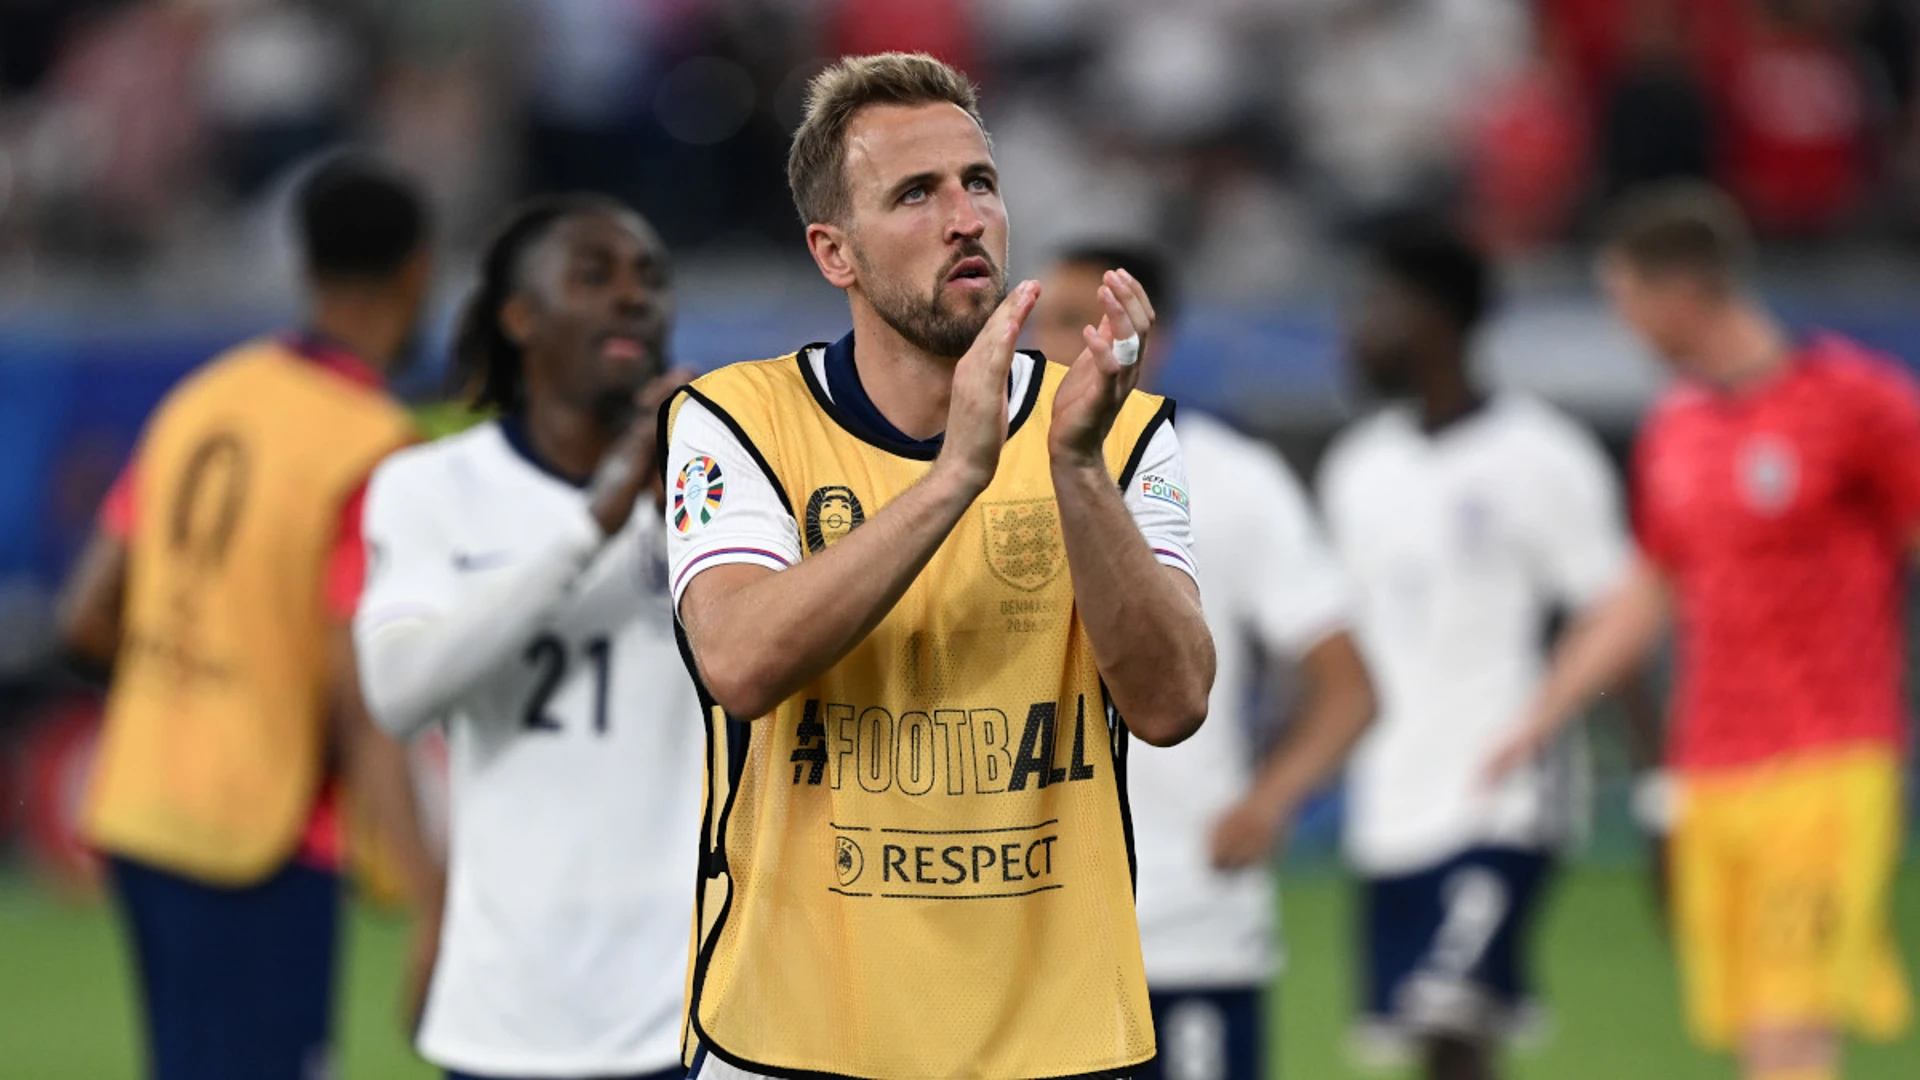 'We'll get there' says Kane after England splutter in Denmark draw